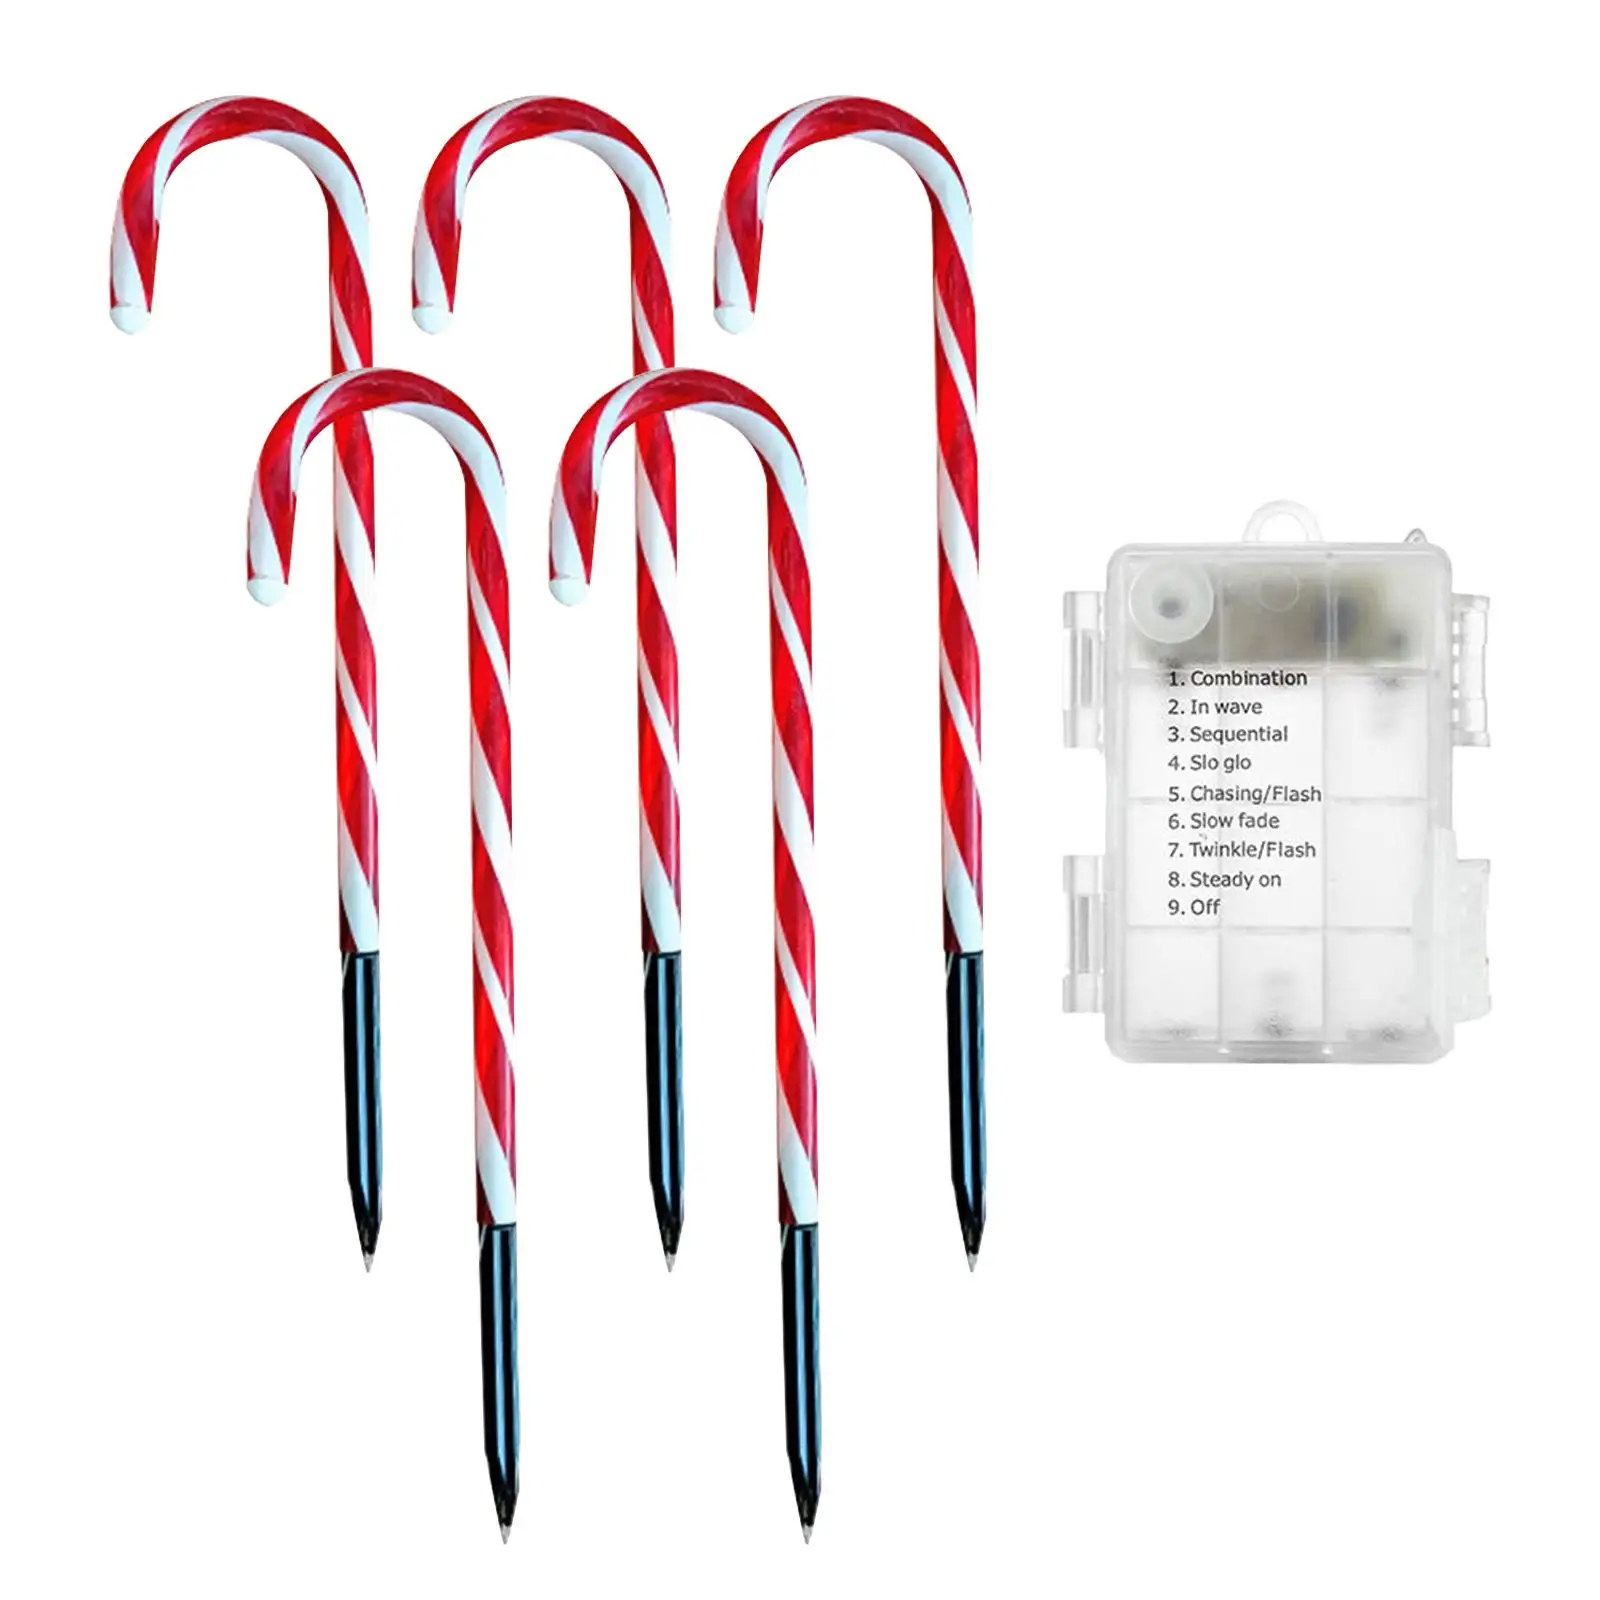 Christmas LED Lamps Decorations Crutch Light Pathway Waterproof Candy Cane Lights for Driveway Walkway Garden Yard Outdoor